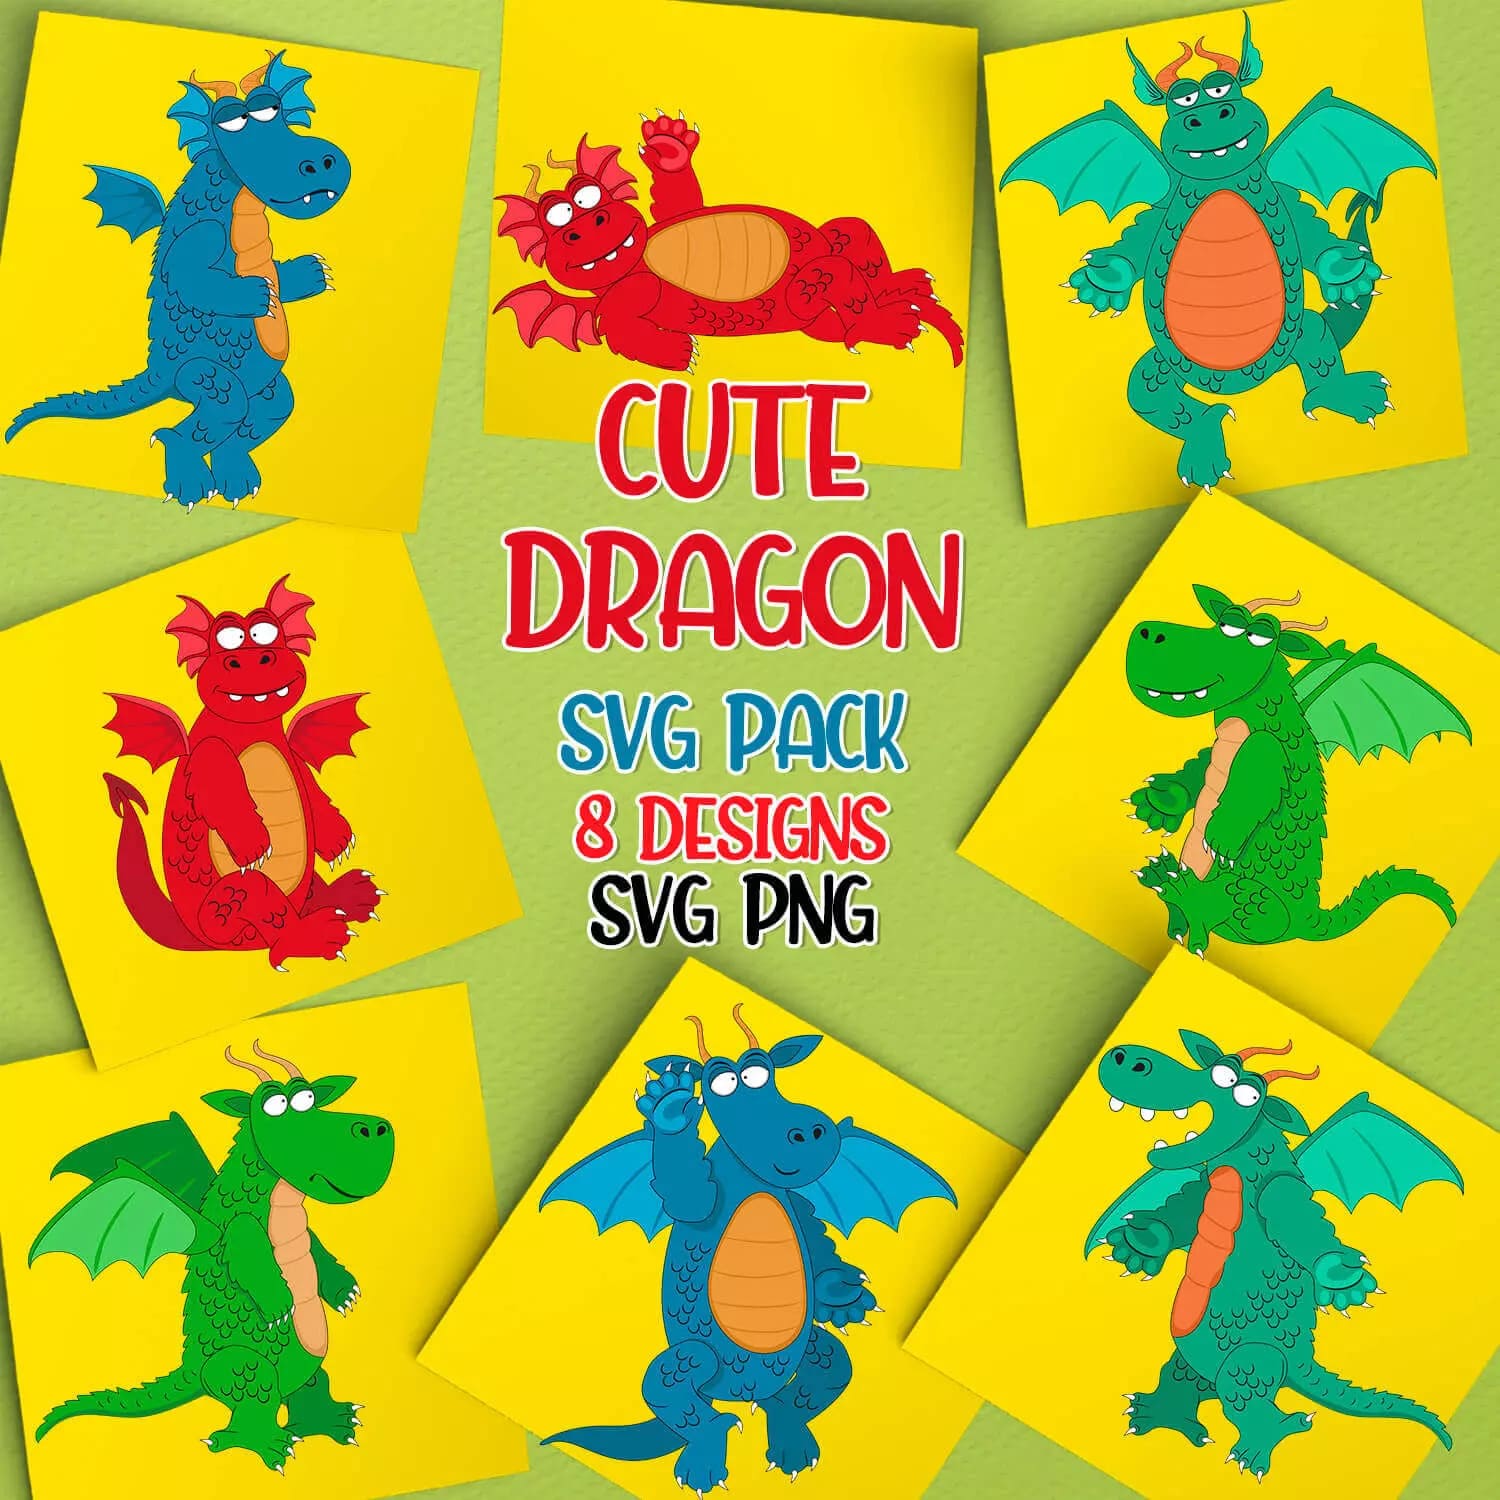 Cut dragon svg pack and designs.